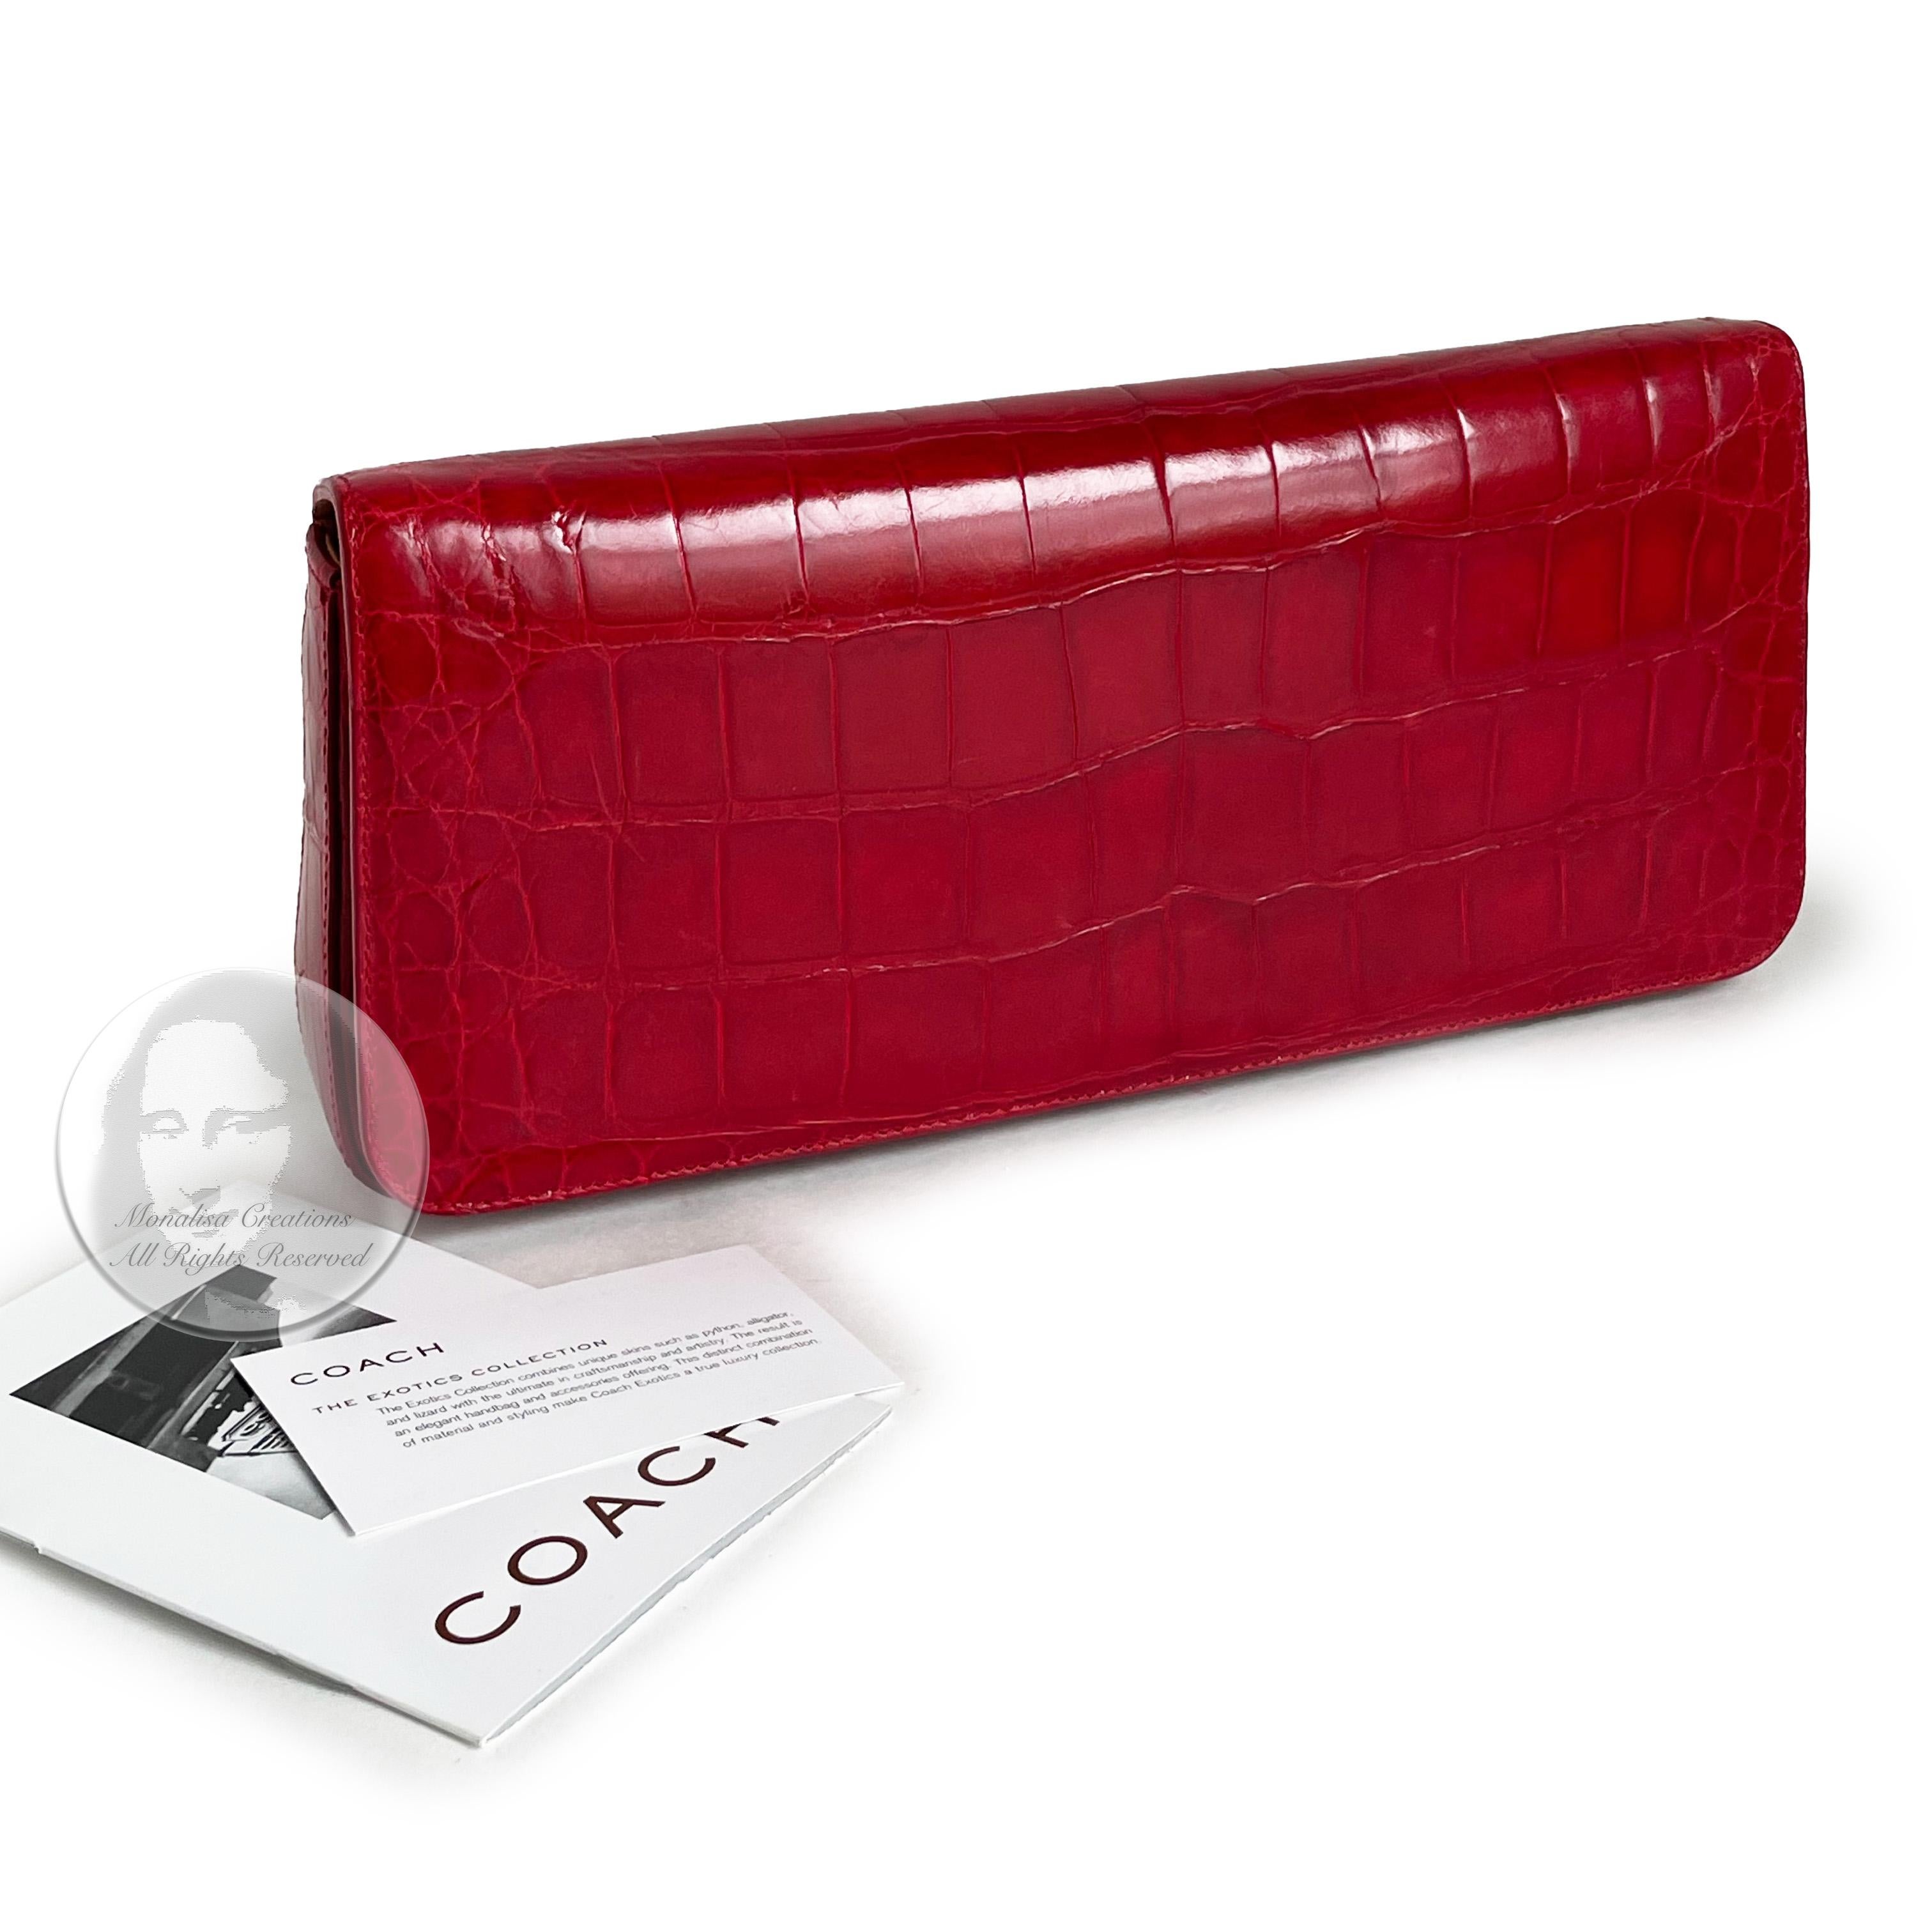 Authentic, preowned Limited Edition Coach Alligator clutch or wristlet bag, from the 2001 Exotic Collection. 

Made from a brilliant glossy red genuine alligator skin, it features a small card slip pocket under the flap and is lined in vachetta &